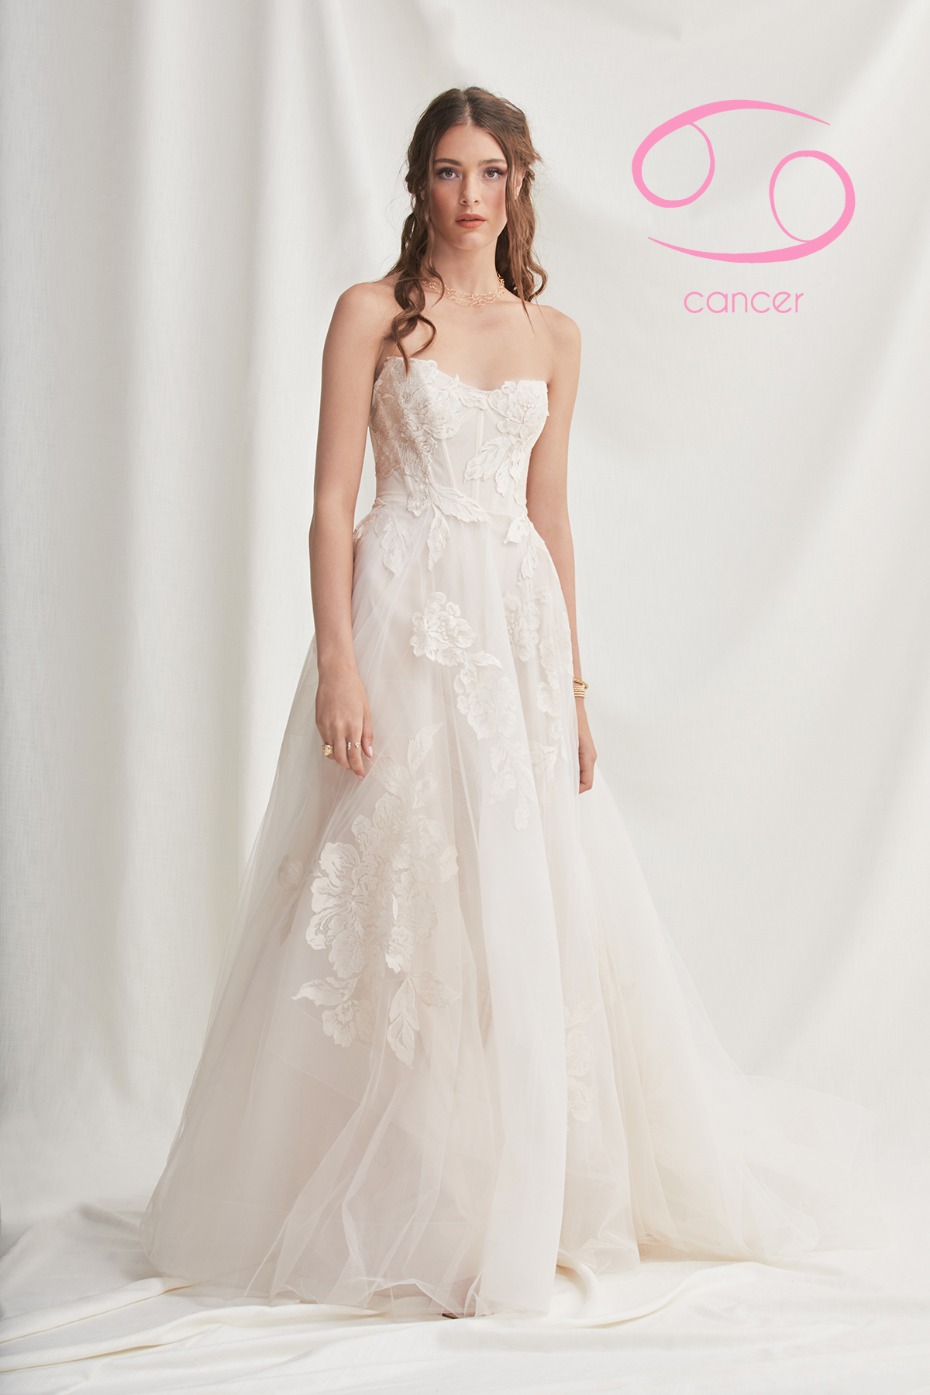 classic aline wedding dress perfect for the Cancer Zodiac